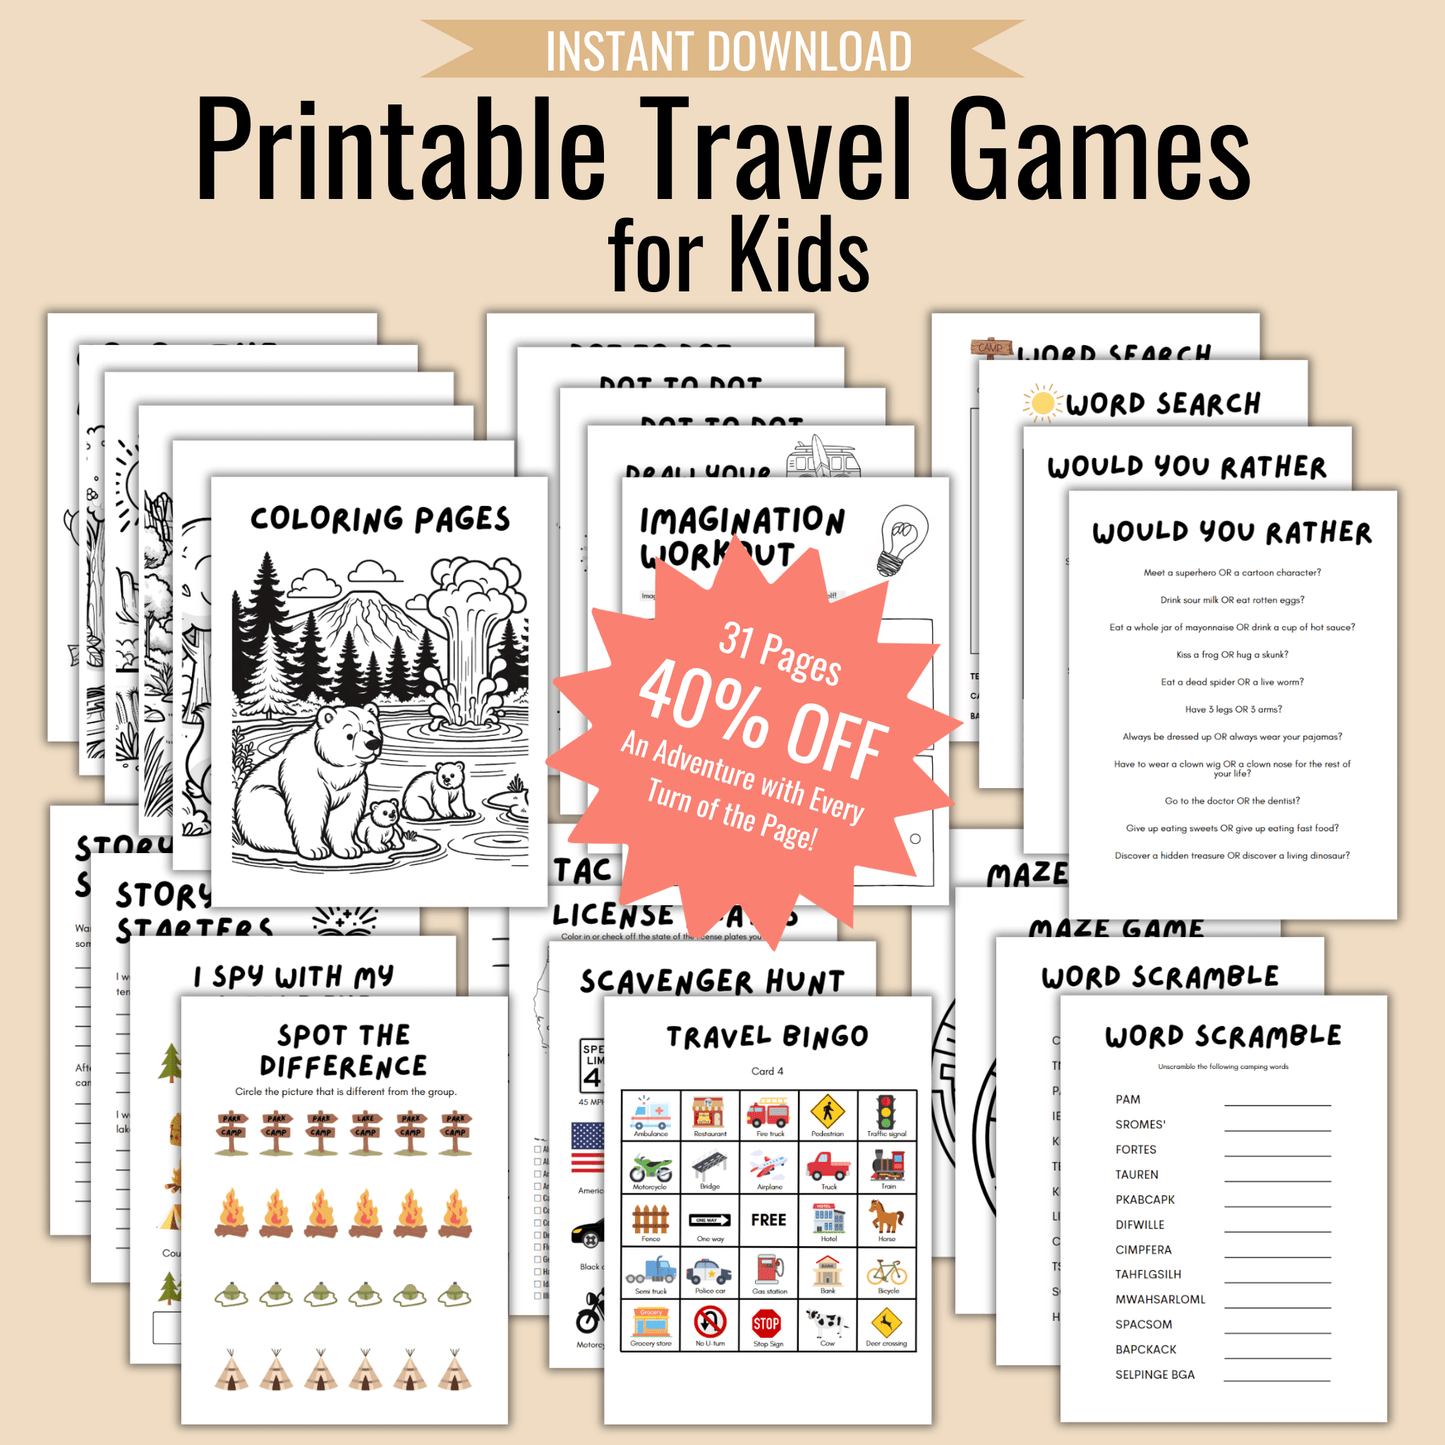 Printable Travel Games for Kids (Road Trip Activity Book) - Camper FAQs